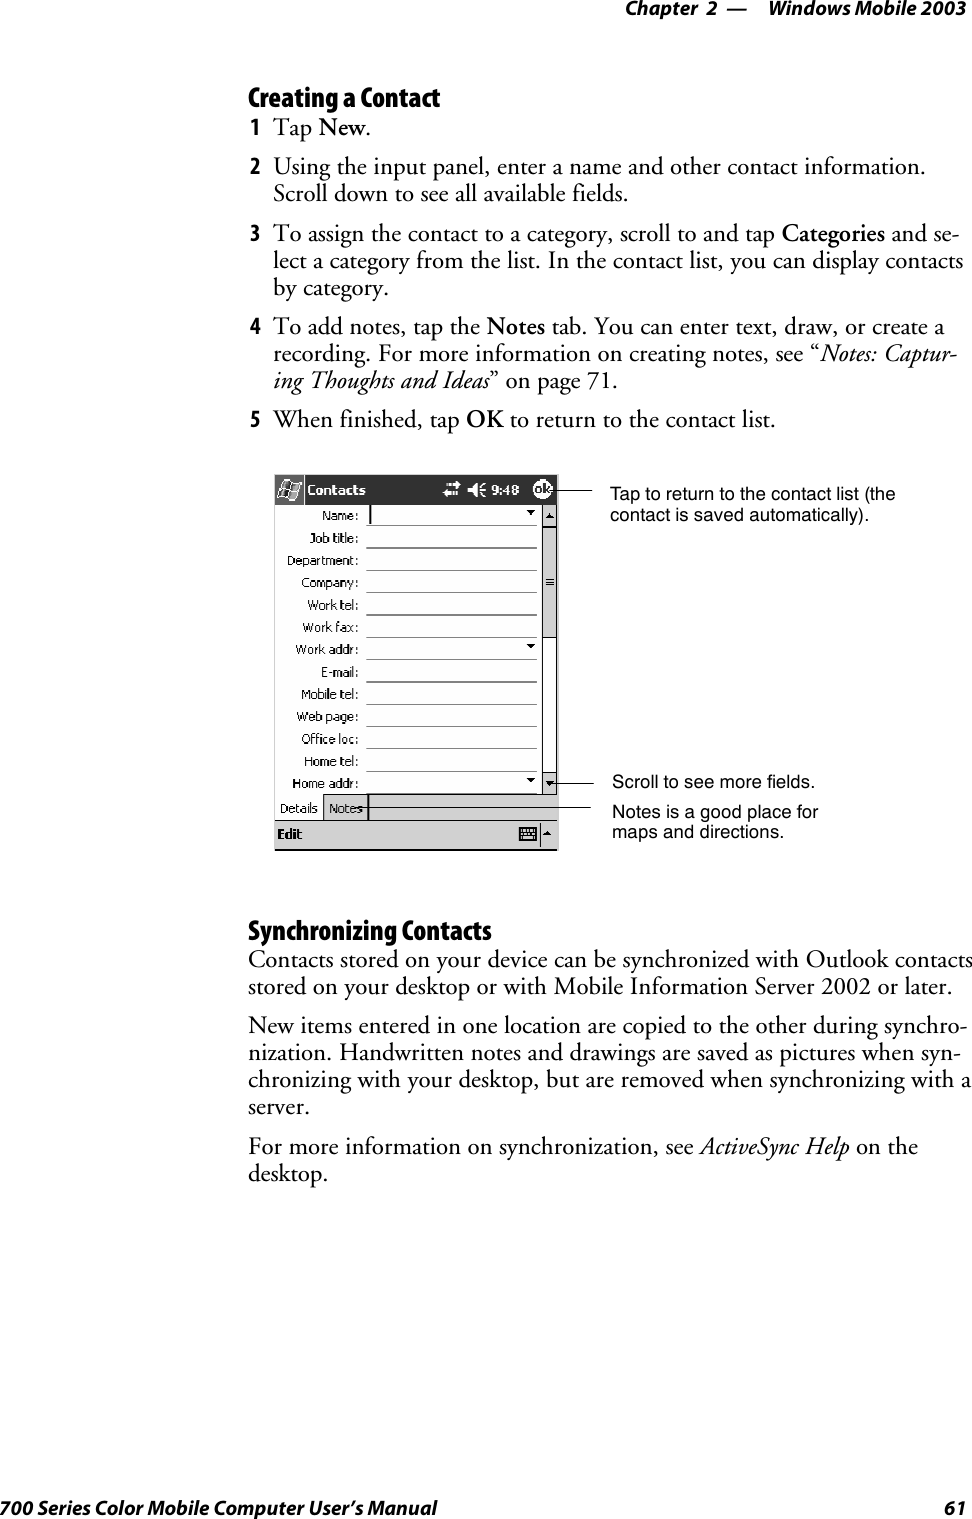 Windows Mobile 2003—Chapter 261700 Series Color Mobile Computer User’s ManualCreating a Contact1Tap New.2Using the input panel, enter a name and other contact information.Scroll down to see all available fields.3To assign the contact to a category, scroll to and tap Categories and se-lect a category from the list. In the contact list, you can display contactsby category.4To add notes, tap the Notes tab. You can enter text, draw, or create arecording. For more information on creating notes, see “Notes: Captur-ing Thoughts and Ideas” on page 71.5When finished, tap OK to return to the contact list.Tap to return to the contact list (thecontact is saved automatically).Scroll to see more fields.Notes is a good place formaps and directions.Synchronizing ContactsContacts stored on your device can be synchronized with Outlook contactsstored on your desktop or with Mobile Information Server 2002 or later.New items entered in one location are copied to the other during synchro-nization. Handwritten notes and drawings are saved as pictures when syn-chronizing with your desktop, but are removed when synchronizing with aserver.For more information on synchronization, see ActiveSync Help on thedesktop.